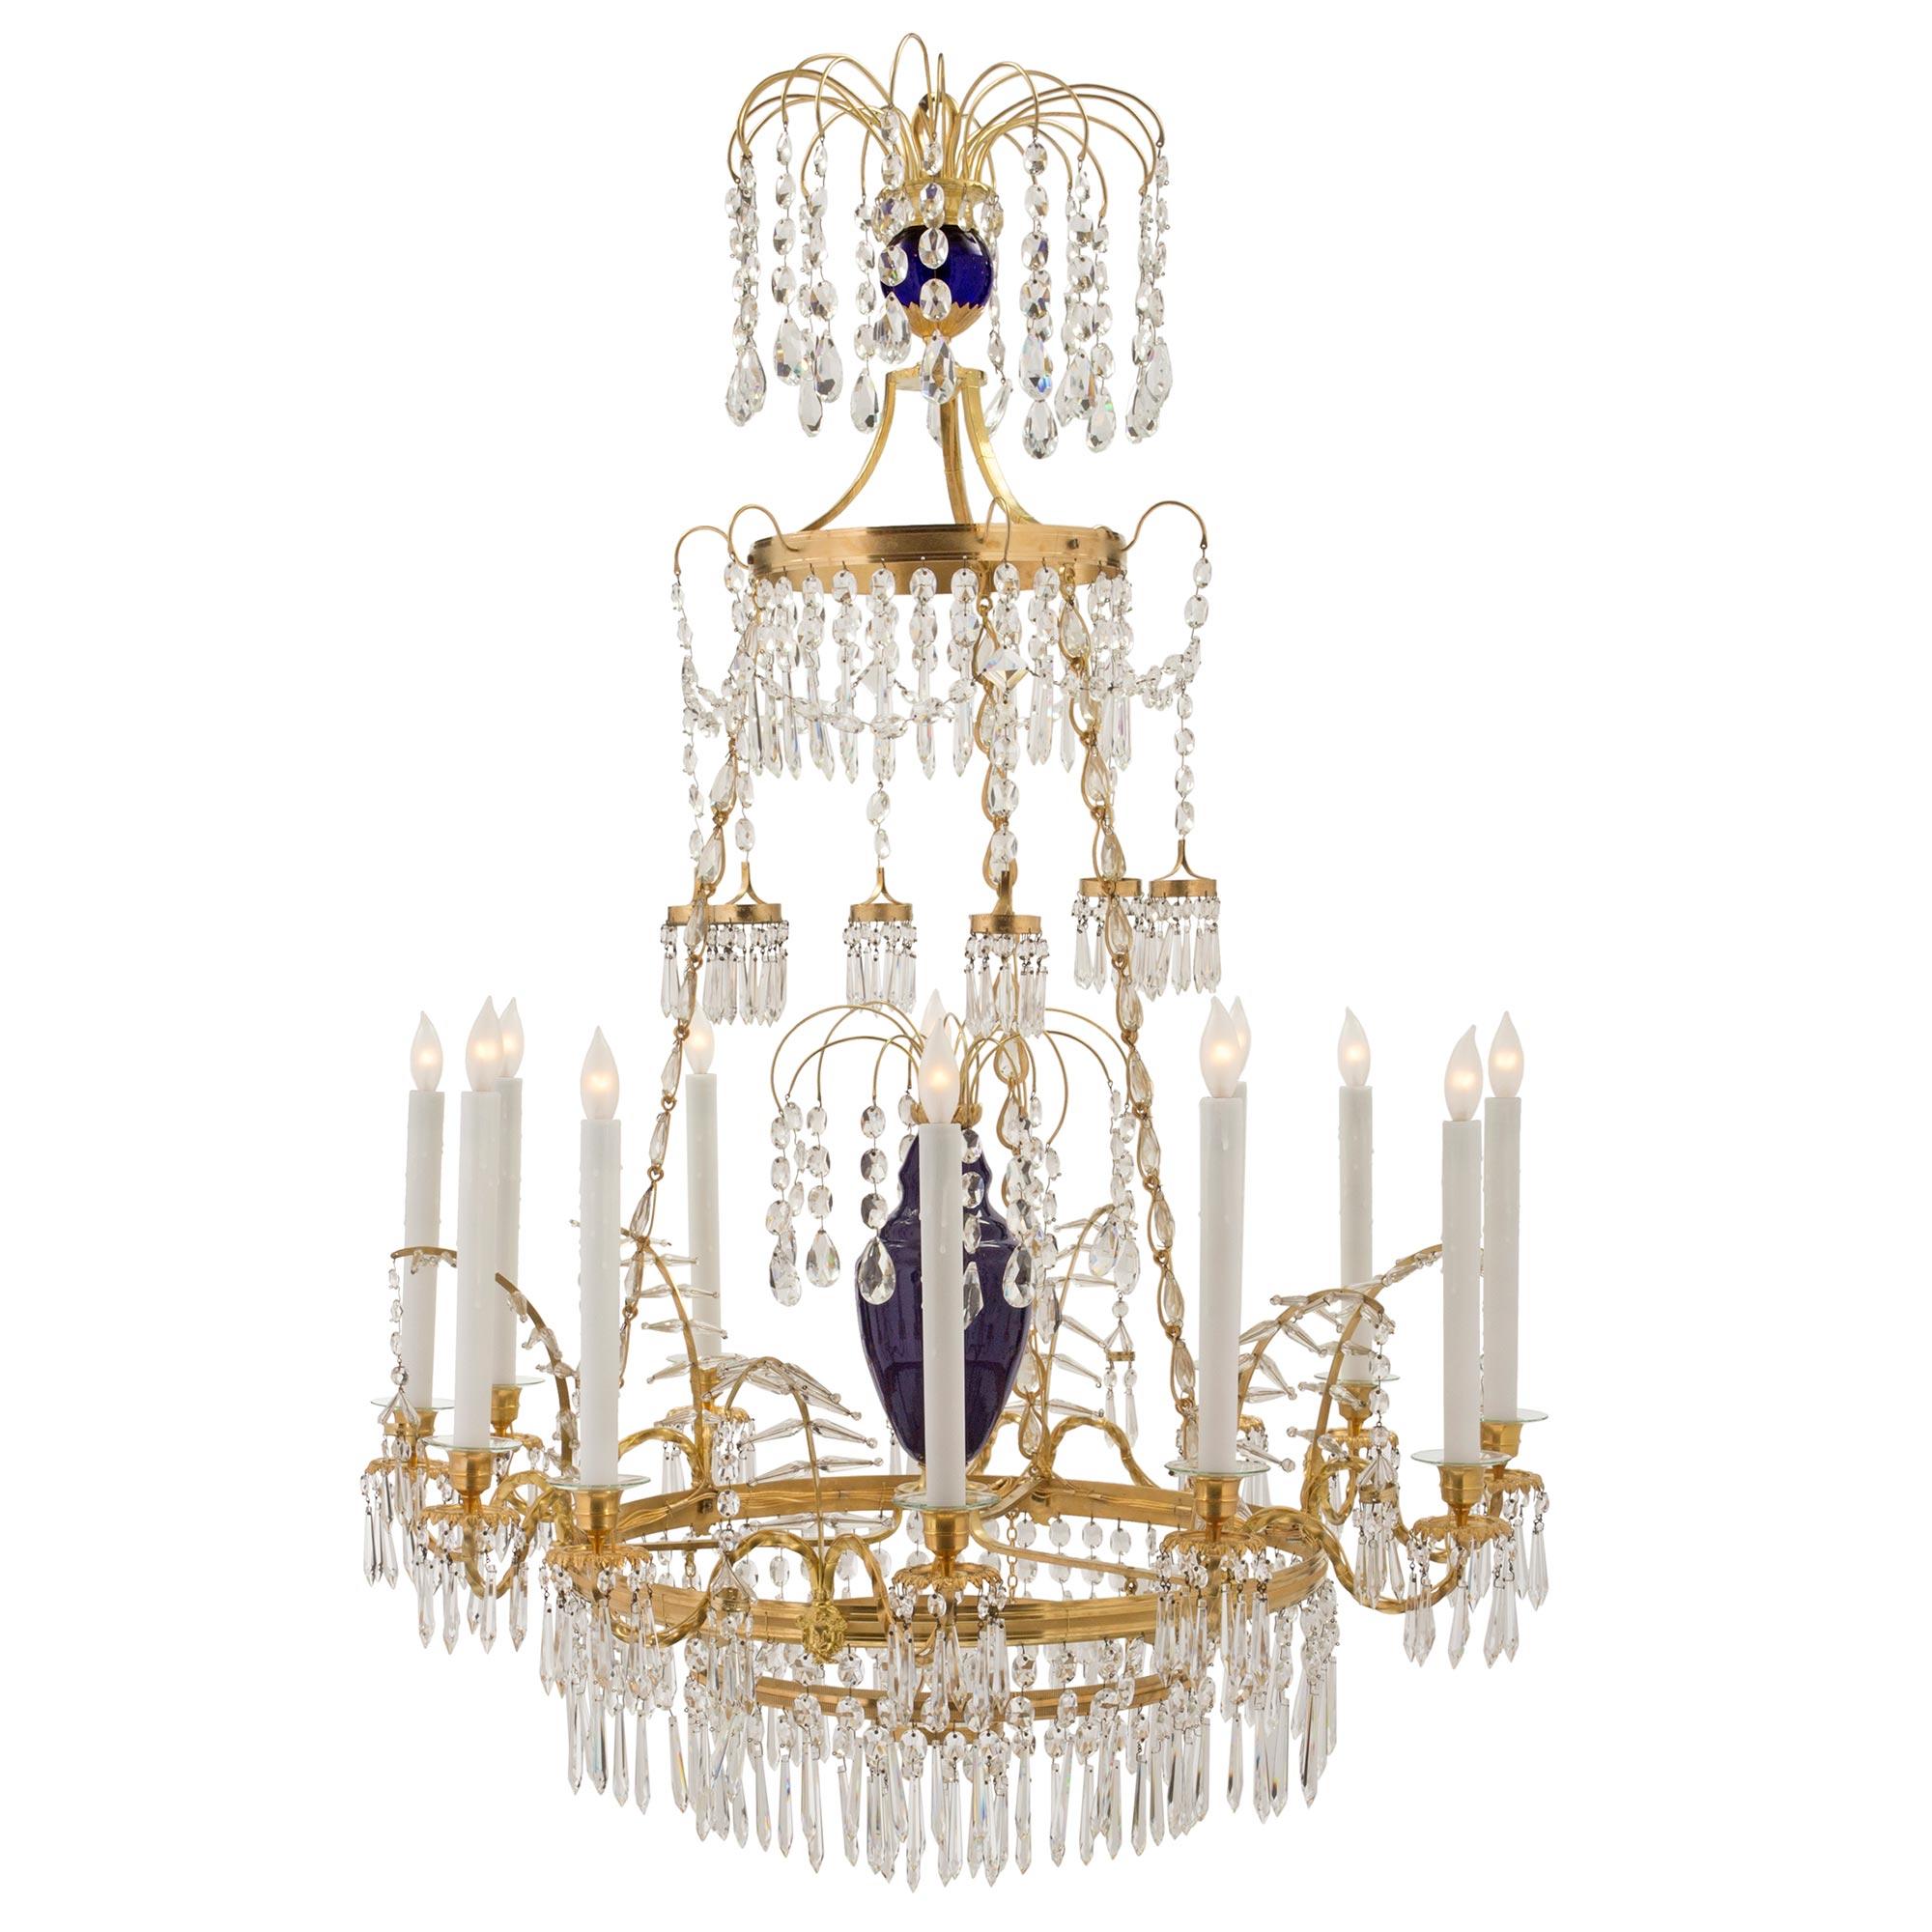 A magnificent Russian 19th century Neo-Classical st. cobalt blue glass, crystal, and ormolu twelve light chandelier. The chandelier is centered by a fine bottom circular pendant with elegant prism-shaped cut crystals. At the center is the striking